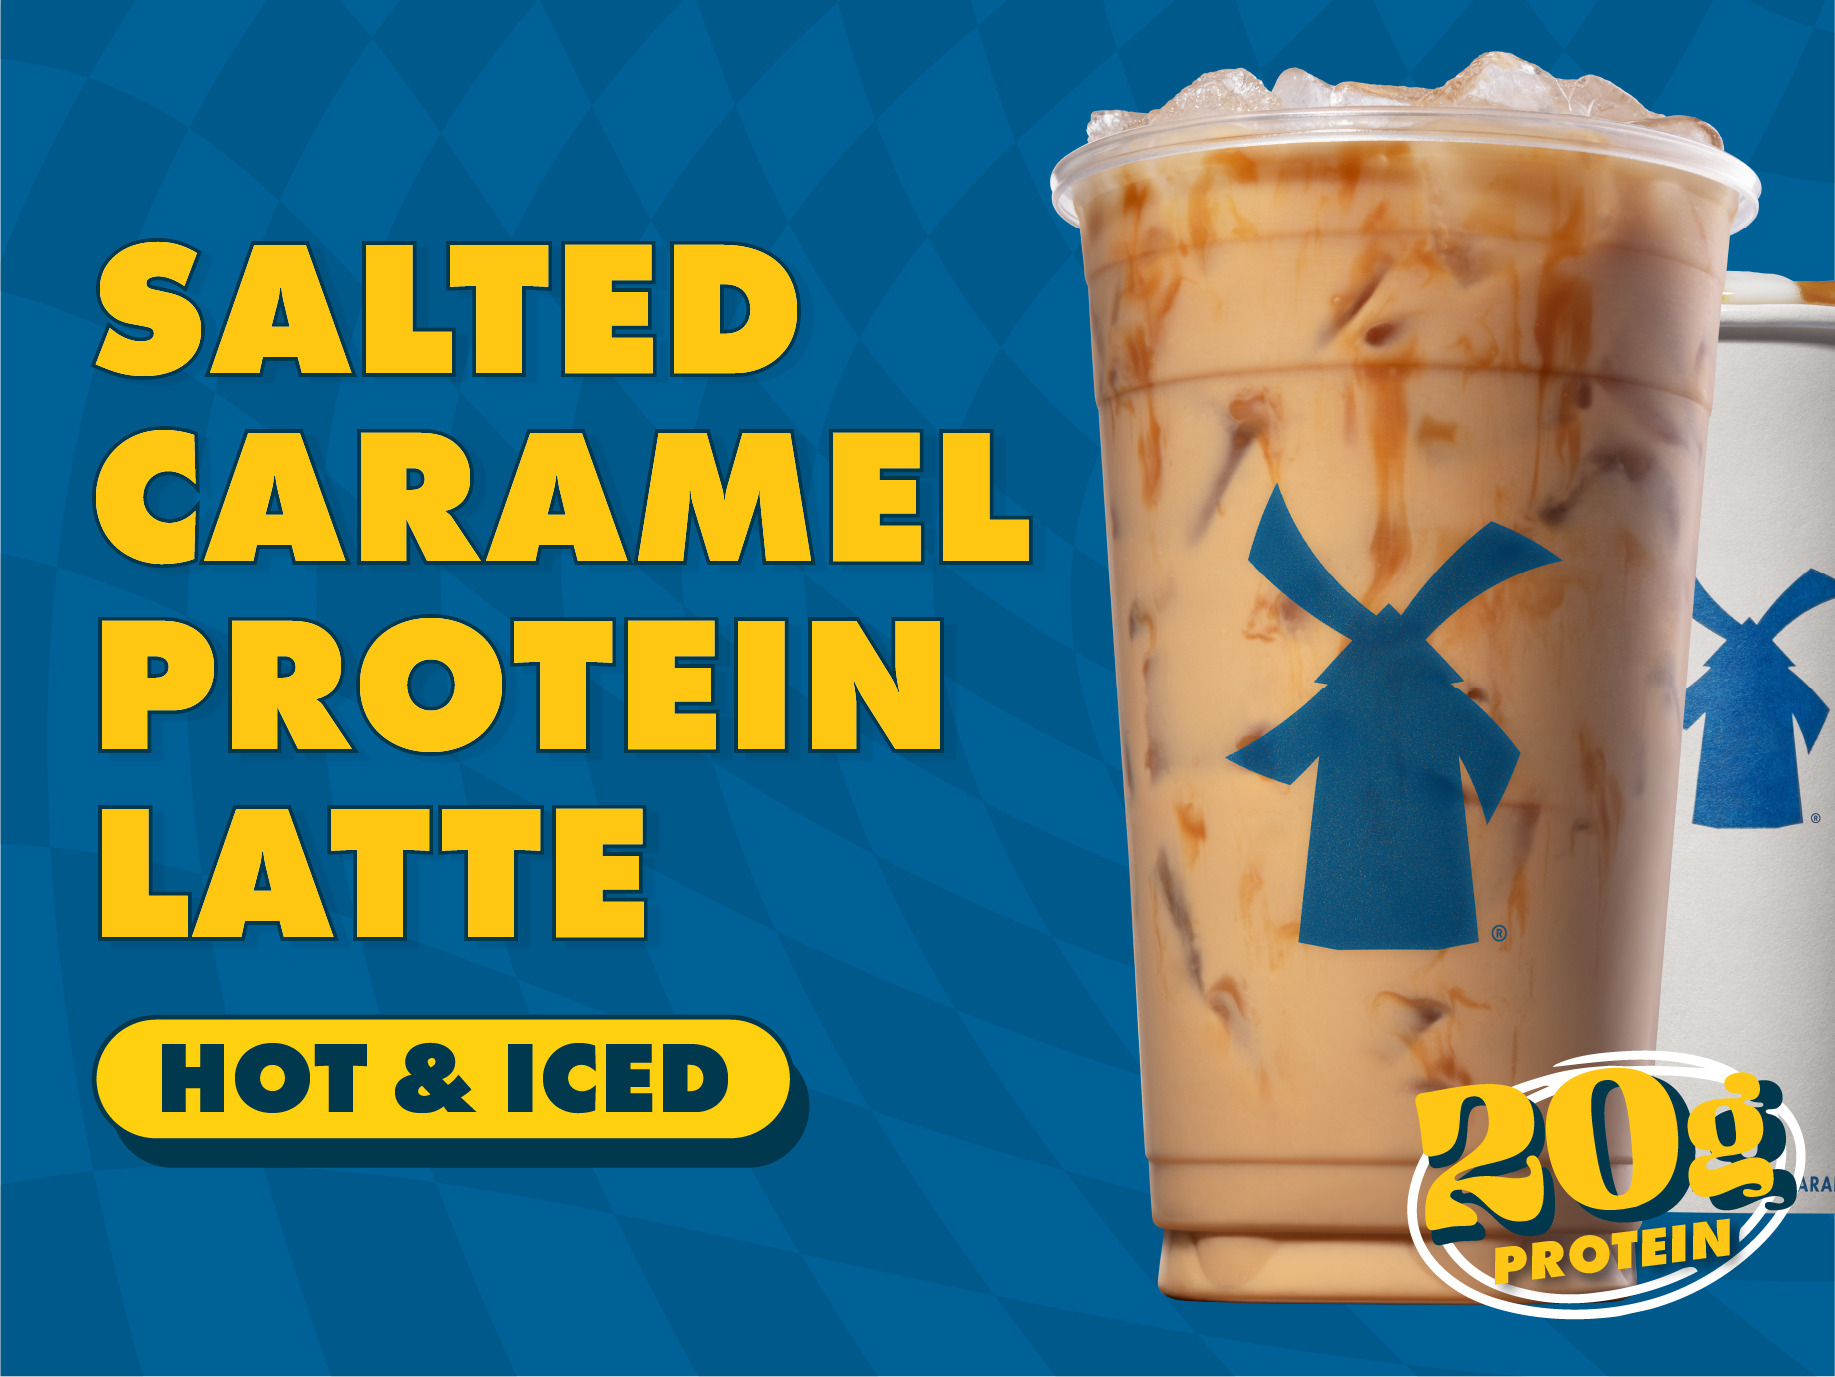 The Salted Caramel Protein Latte features a blend of salted caramel flavor, espresso, protein milk, topped with caramel drizzle